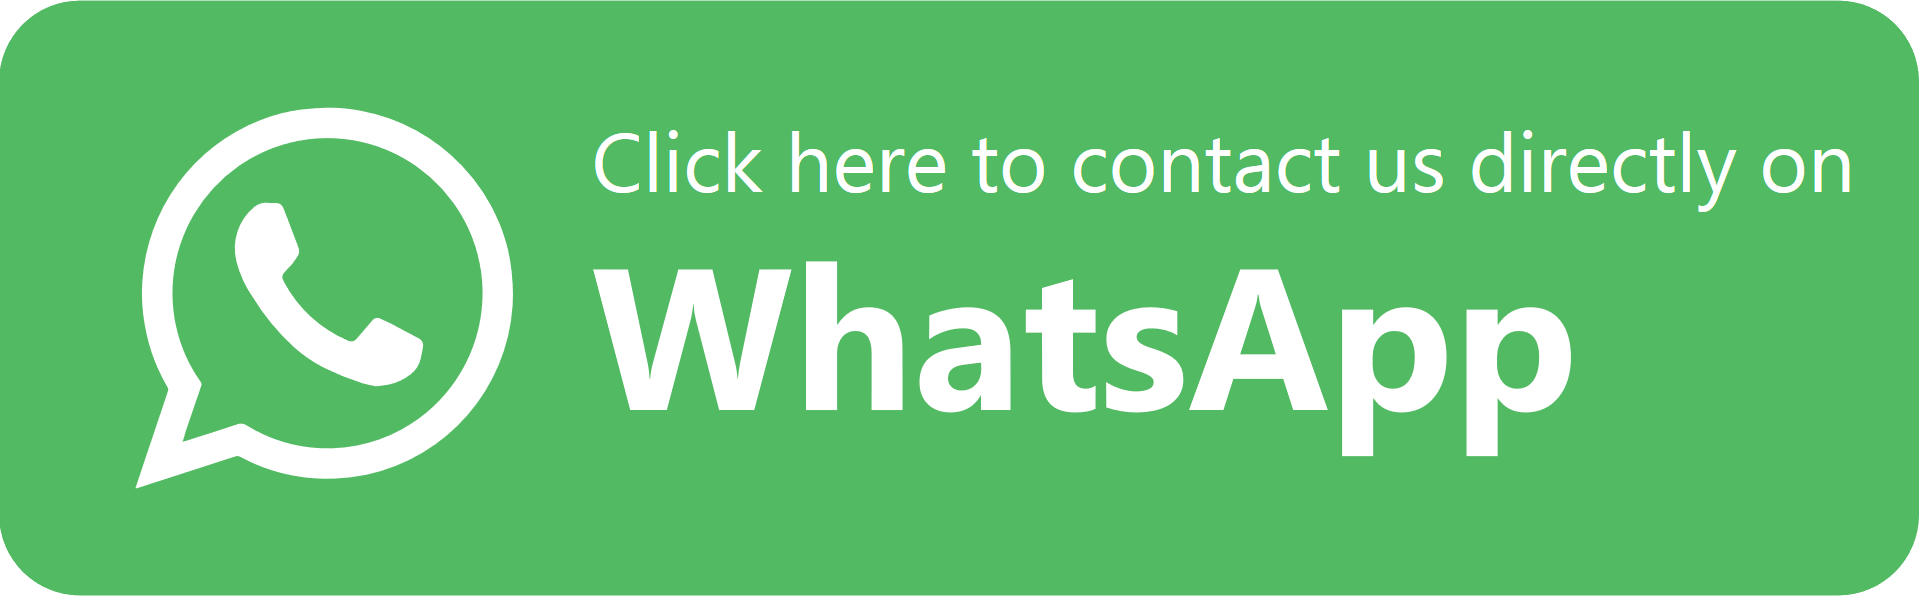 Chat with Us on WhatsApp